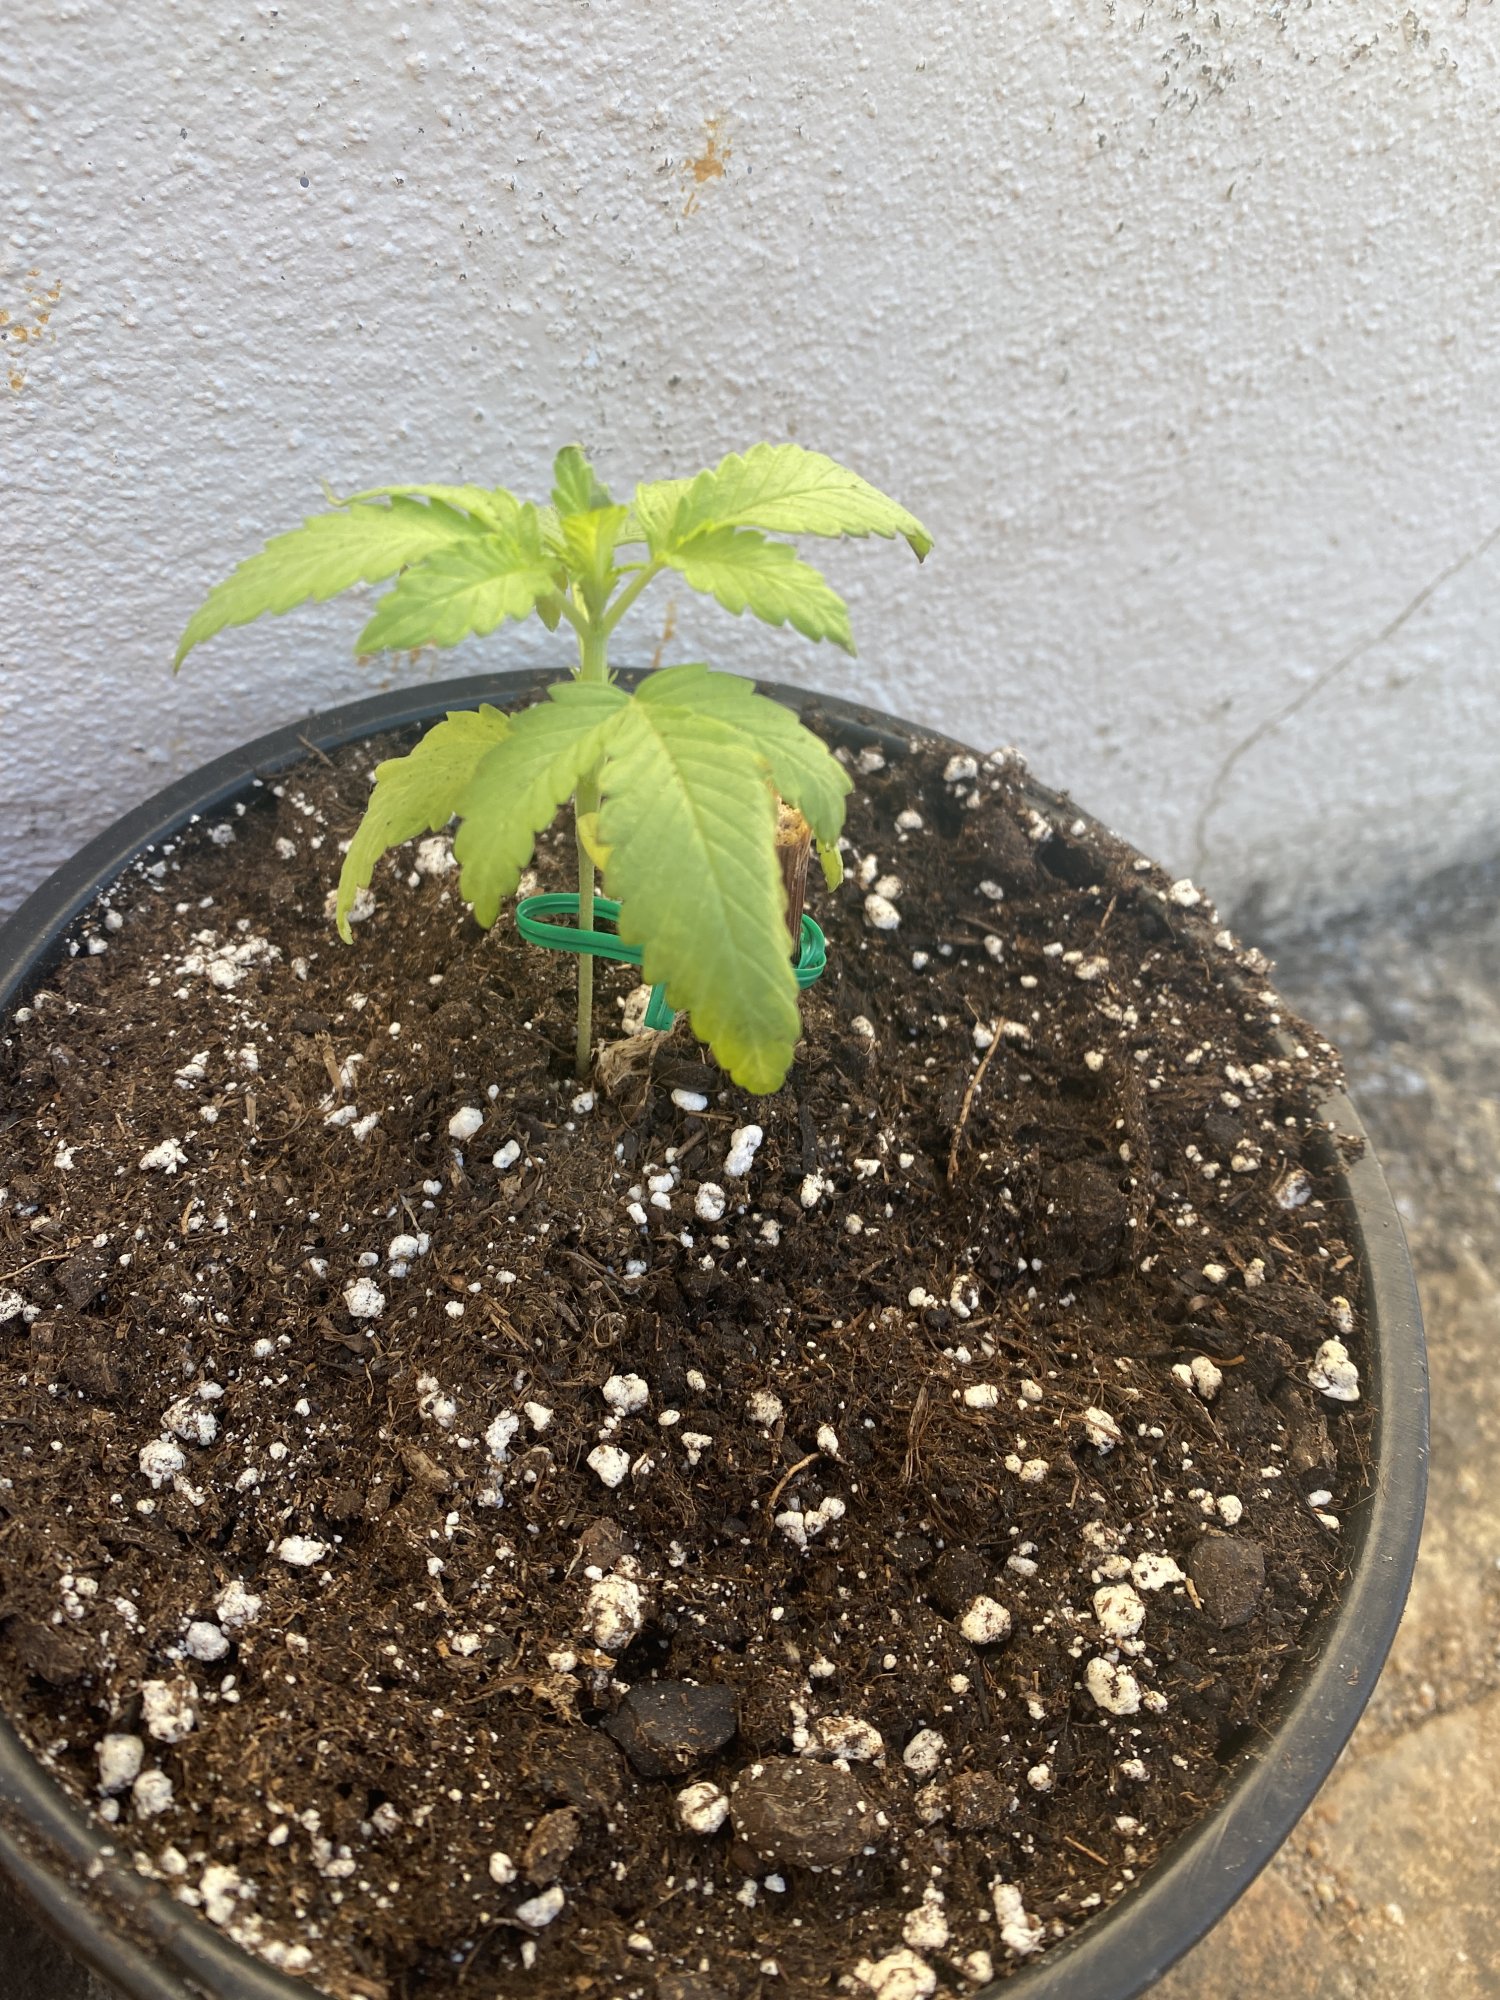 What is going wrong with my plants 2